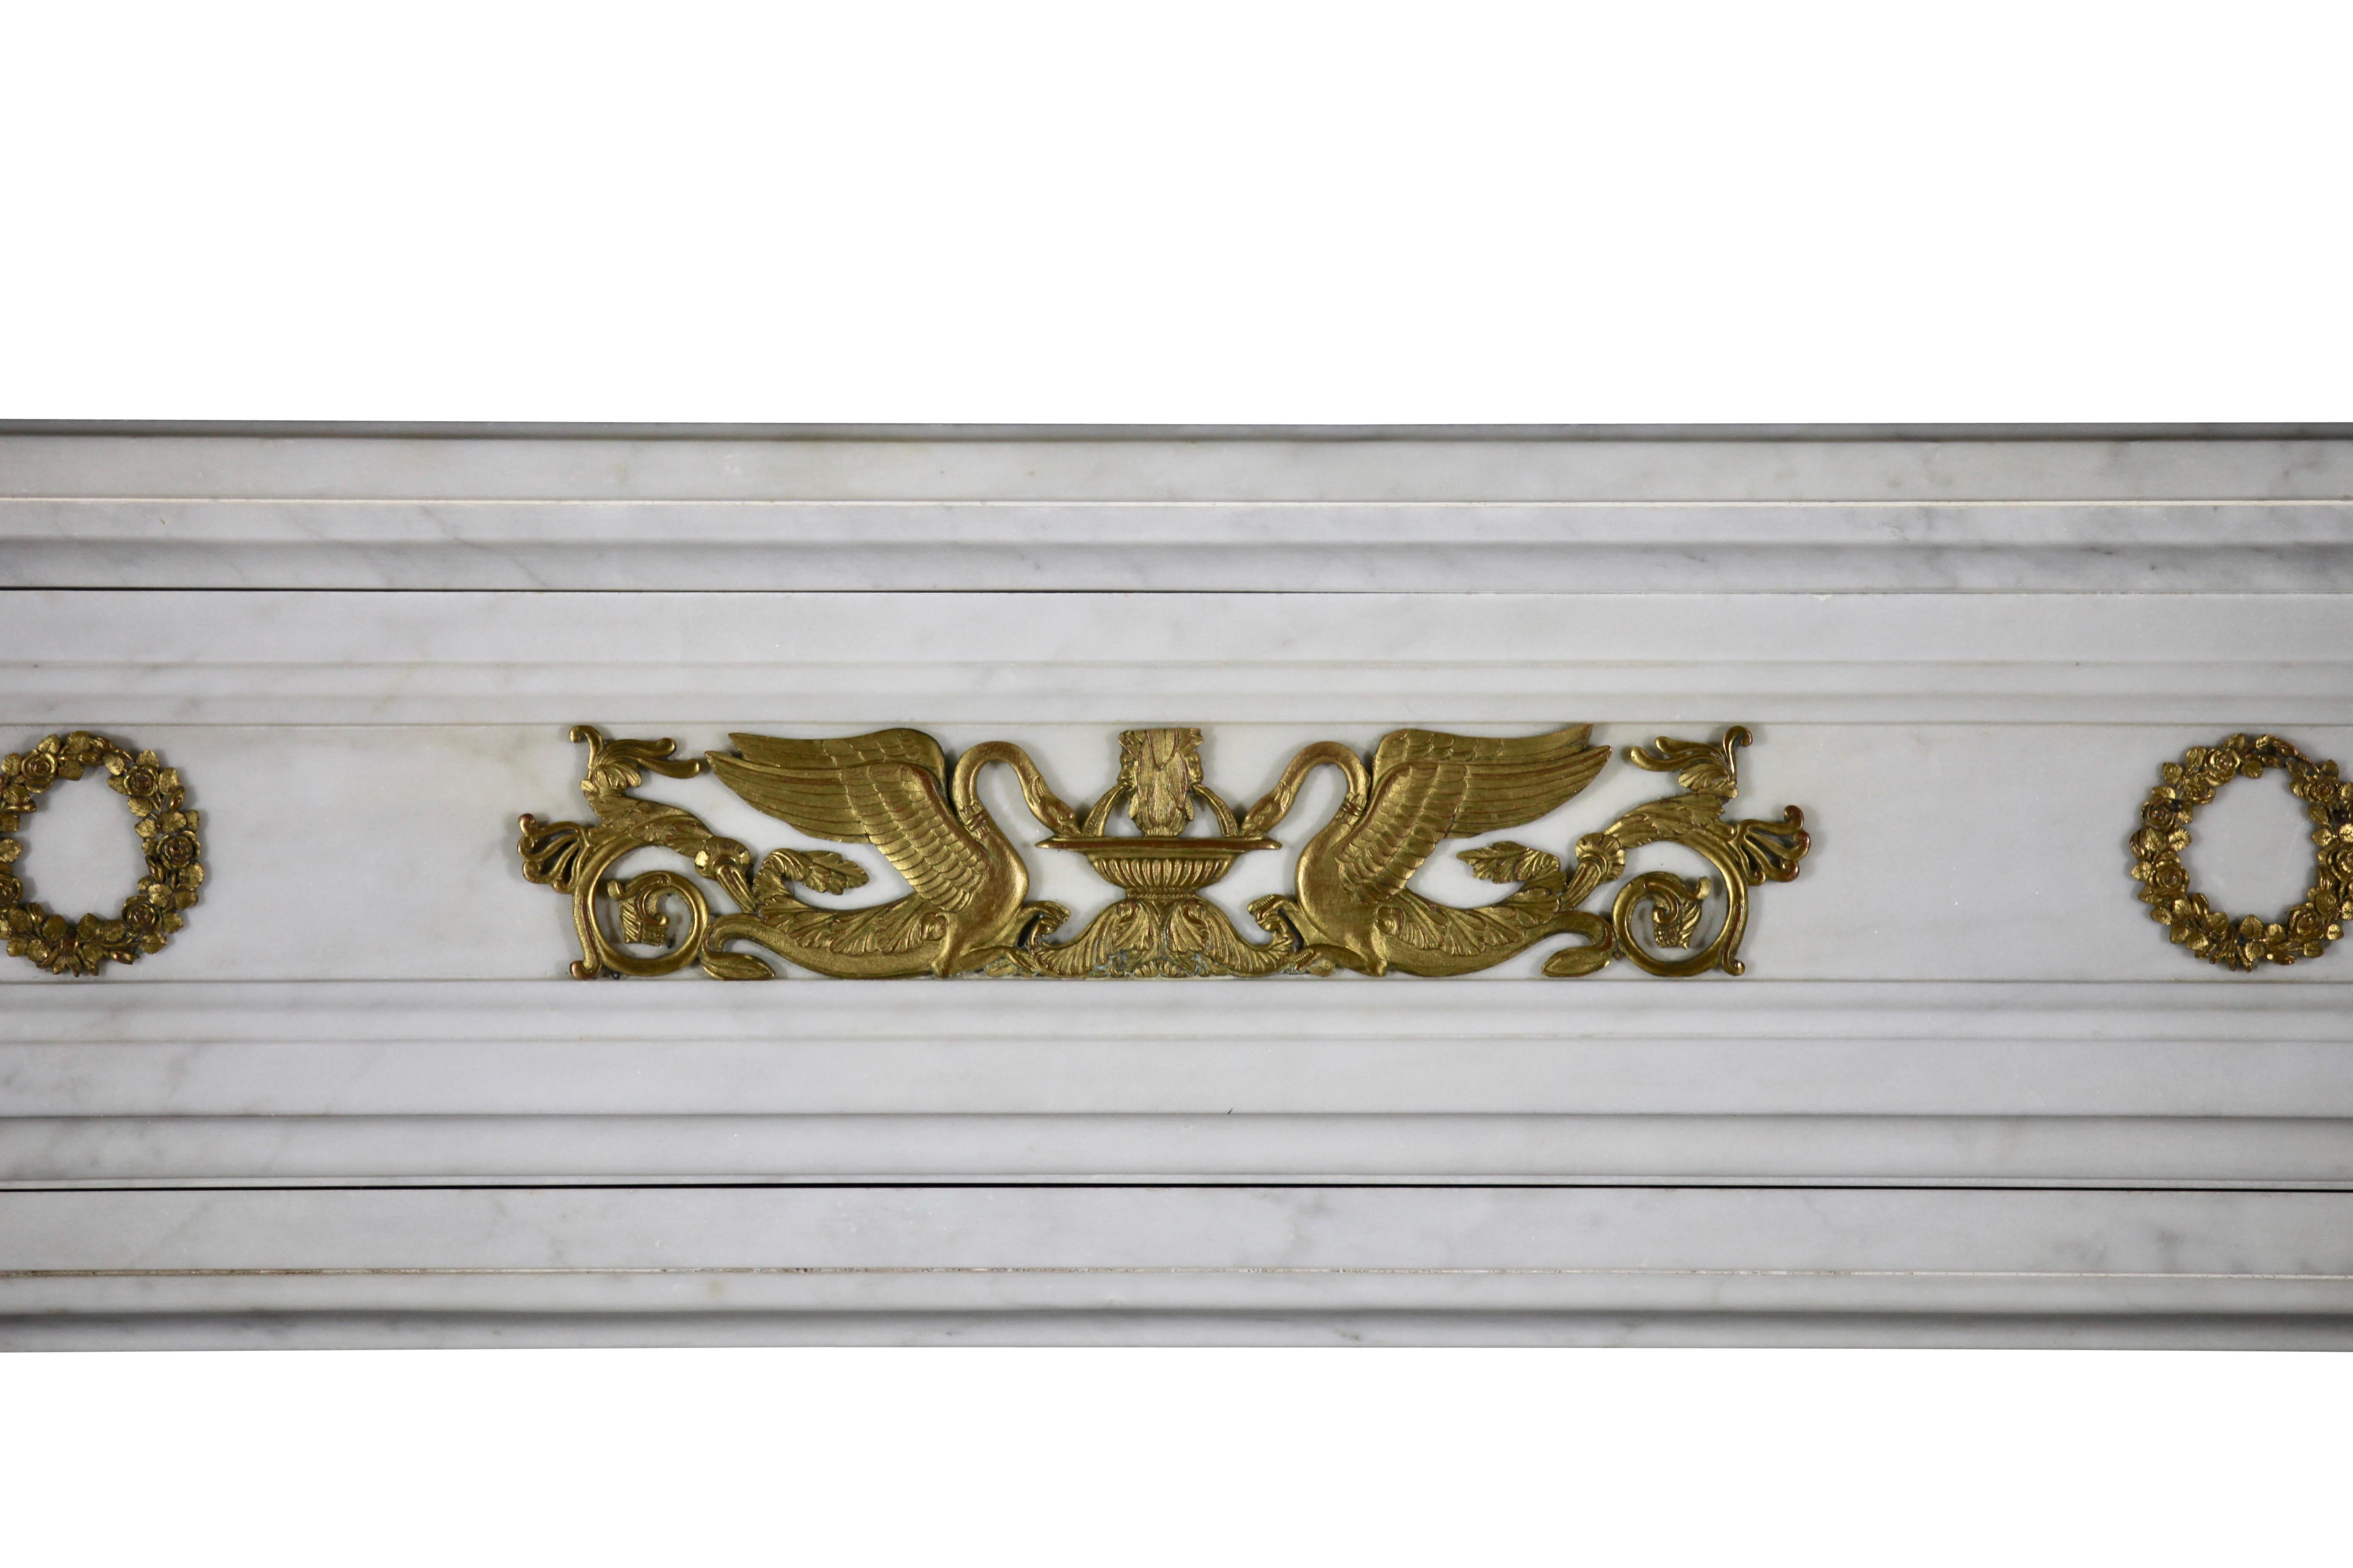 Polished Fine 19th Century European Original Antique Fireplace Mantle from Empire Period For Sale